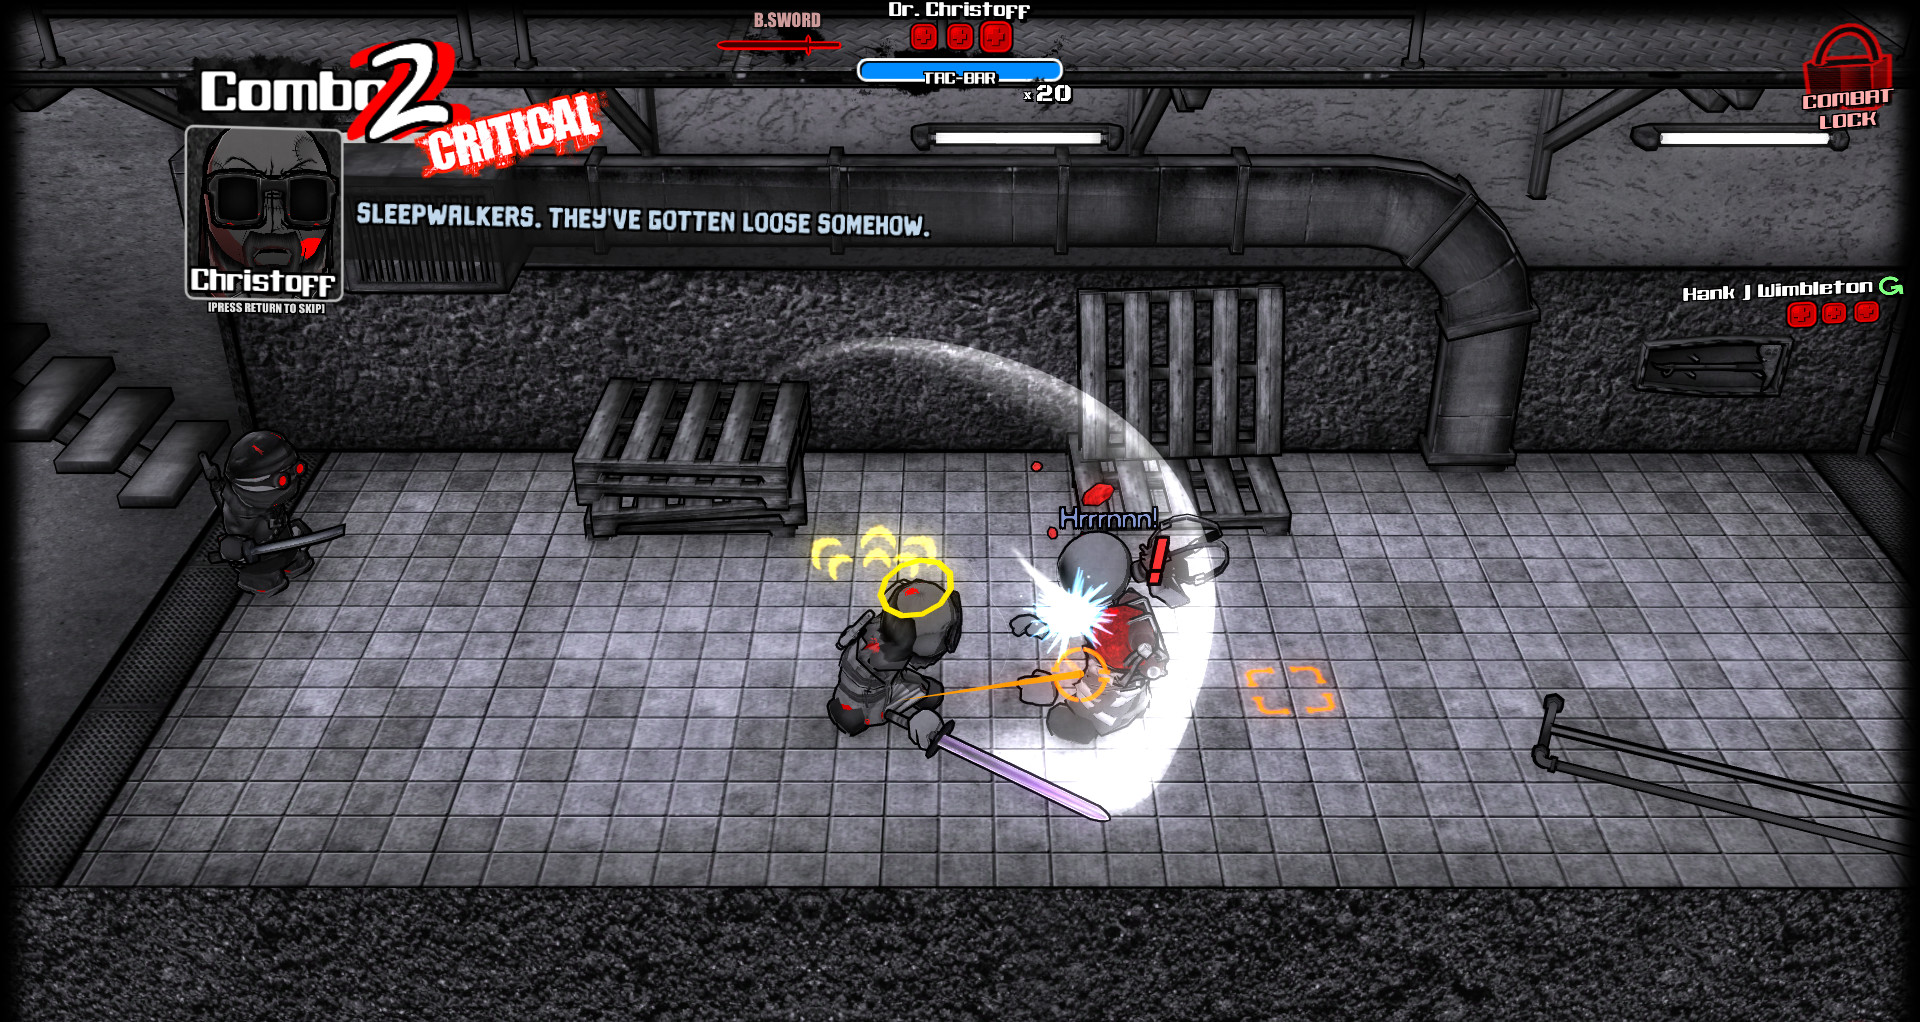 Madness Combat Game for Android - Download